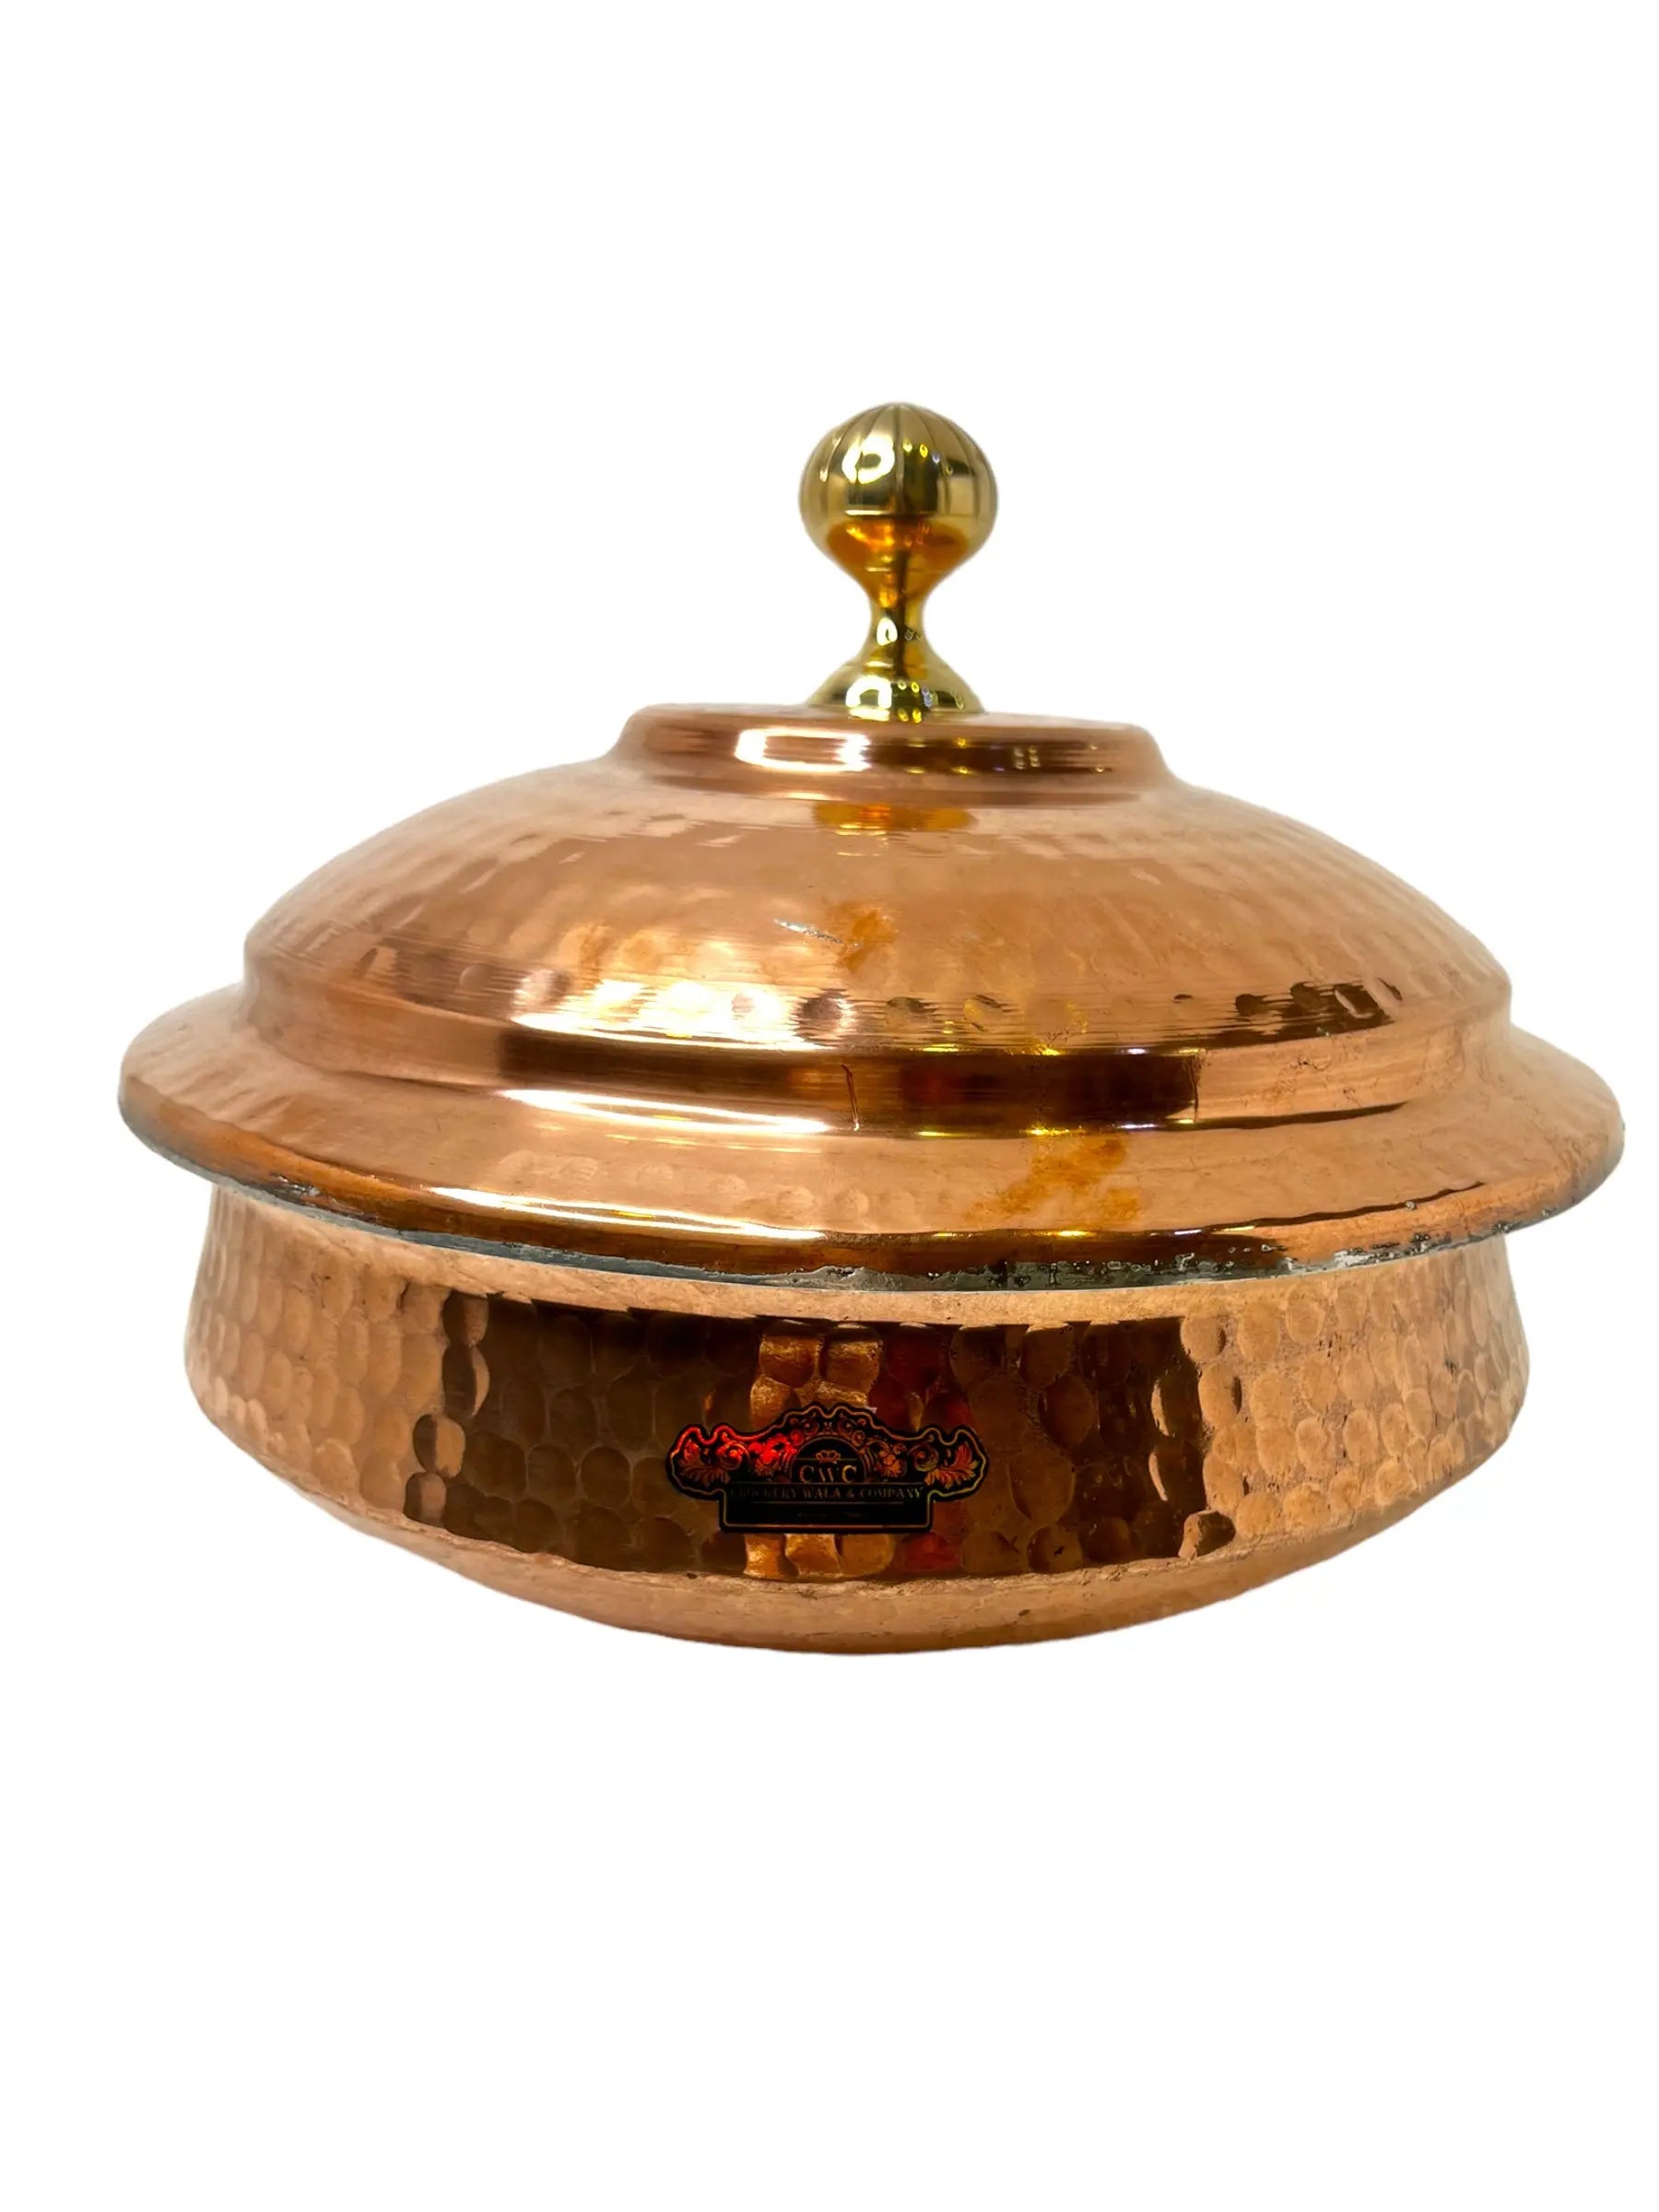 Pure Copper Handi Lagan With Copper Lid For Cooking